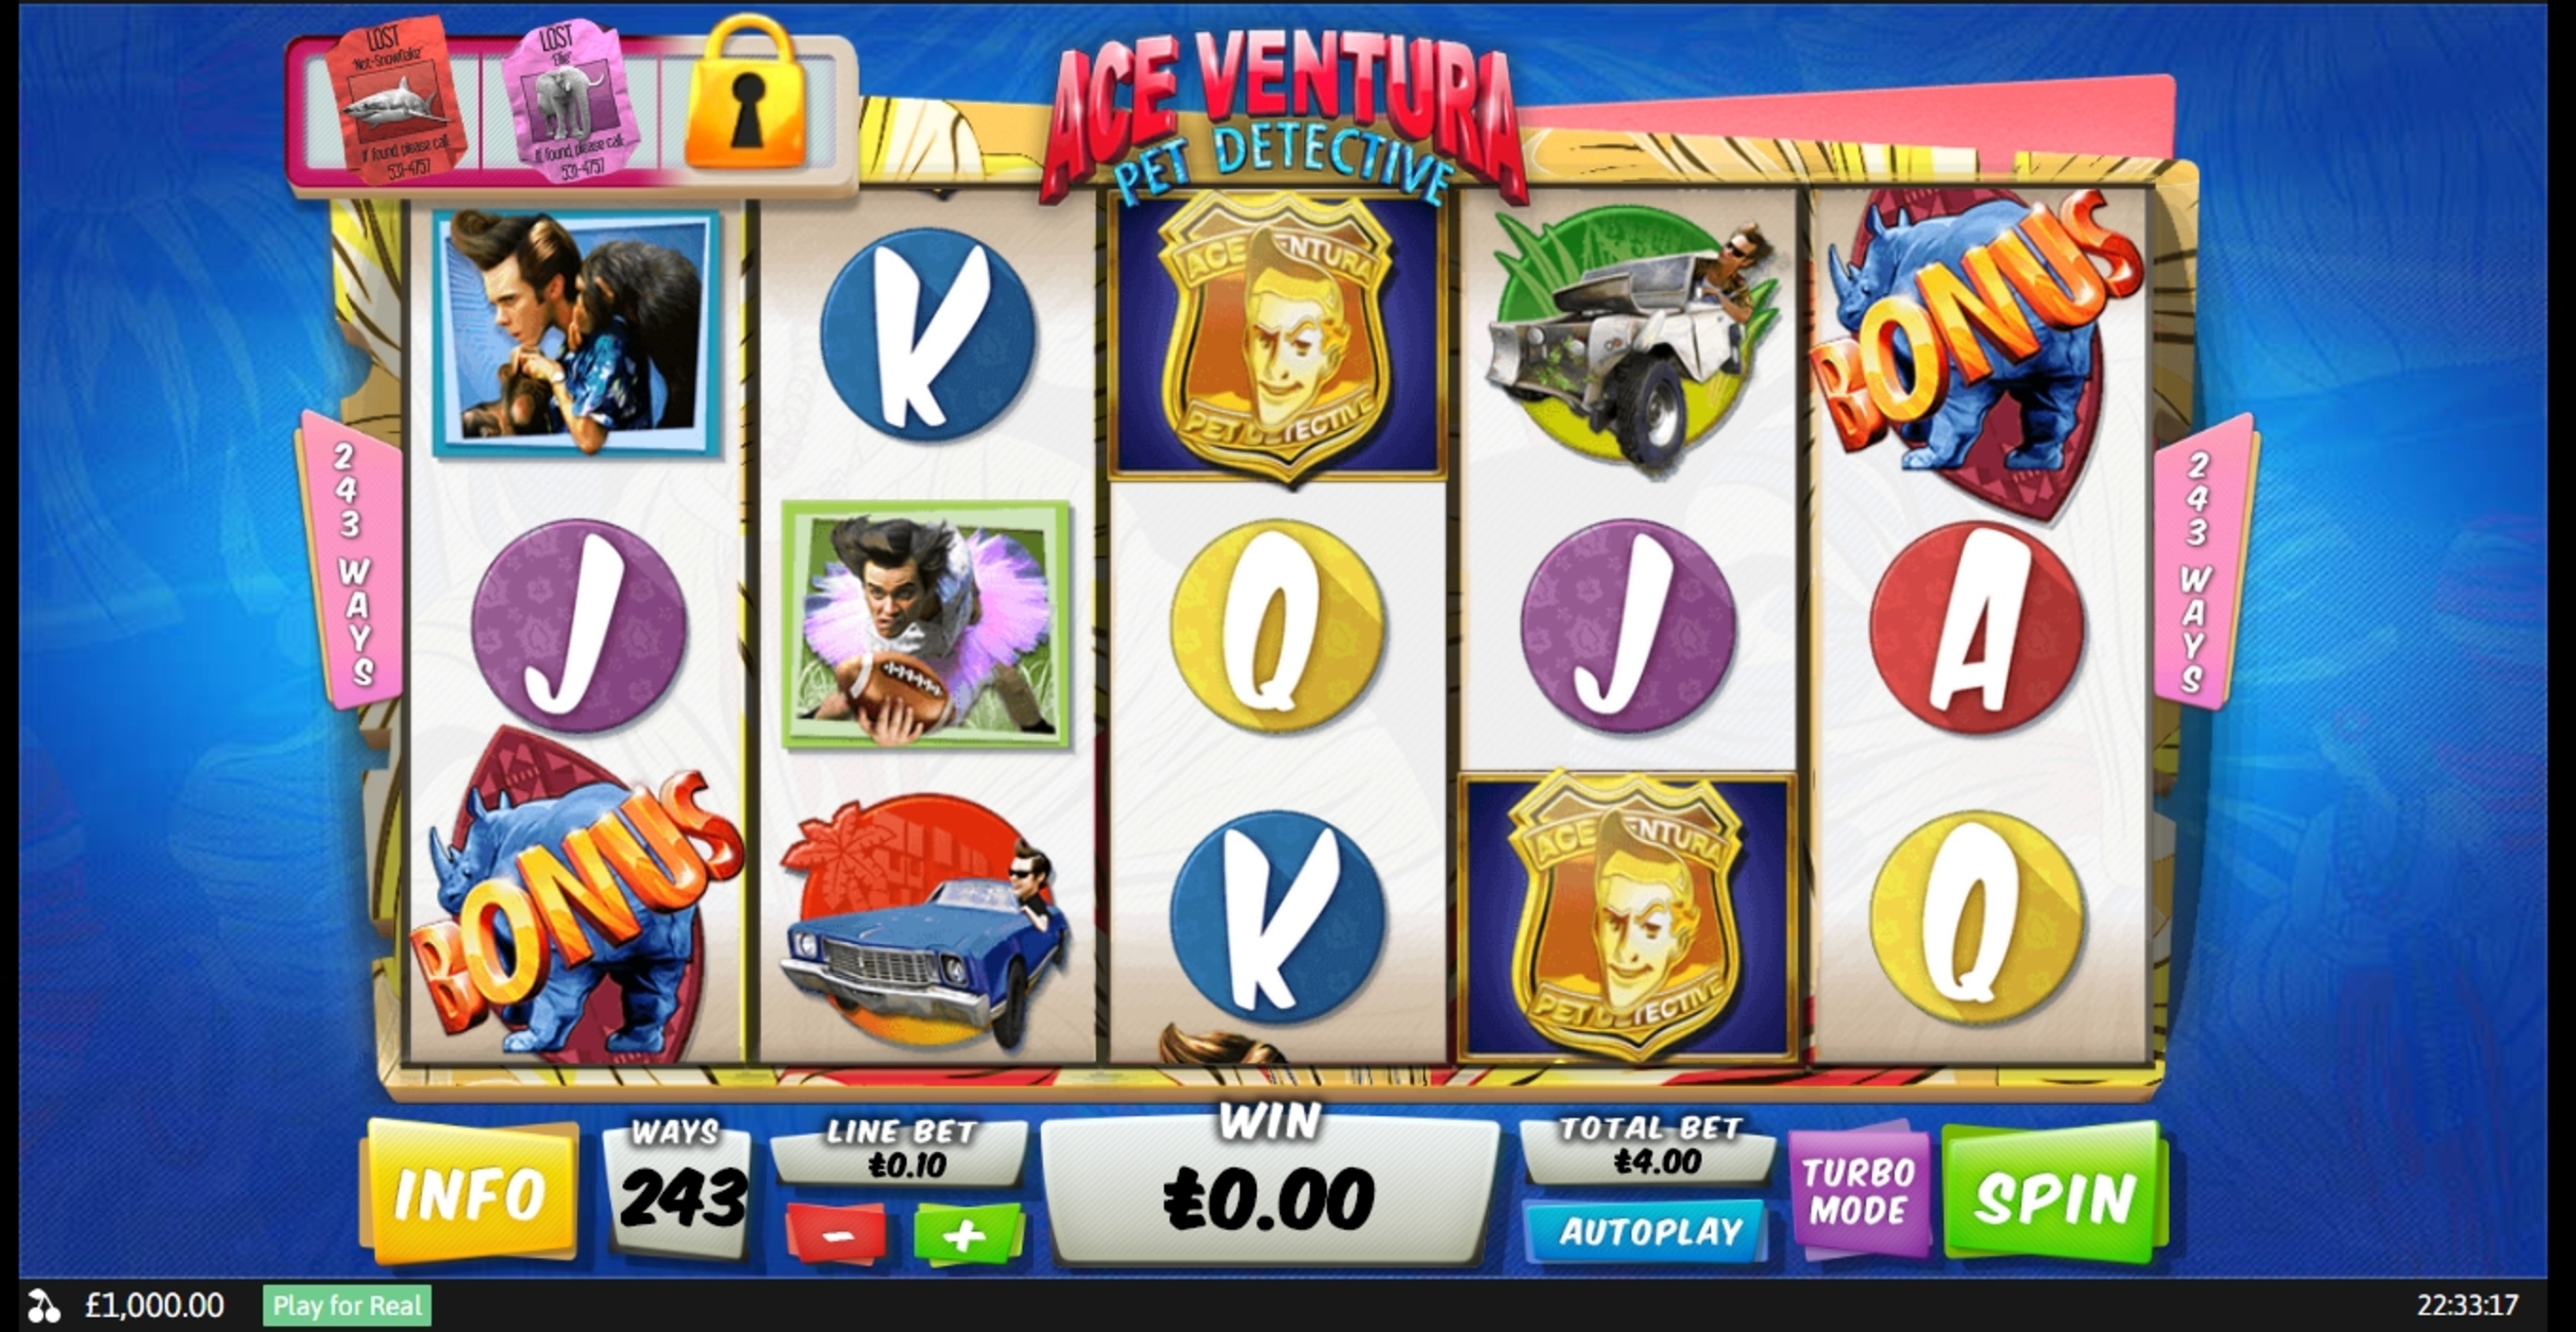 Reels in Ace Ventura Slot Game by Playtech